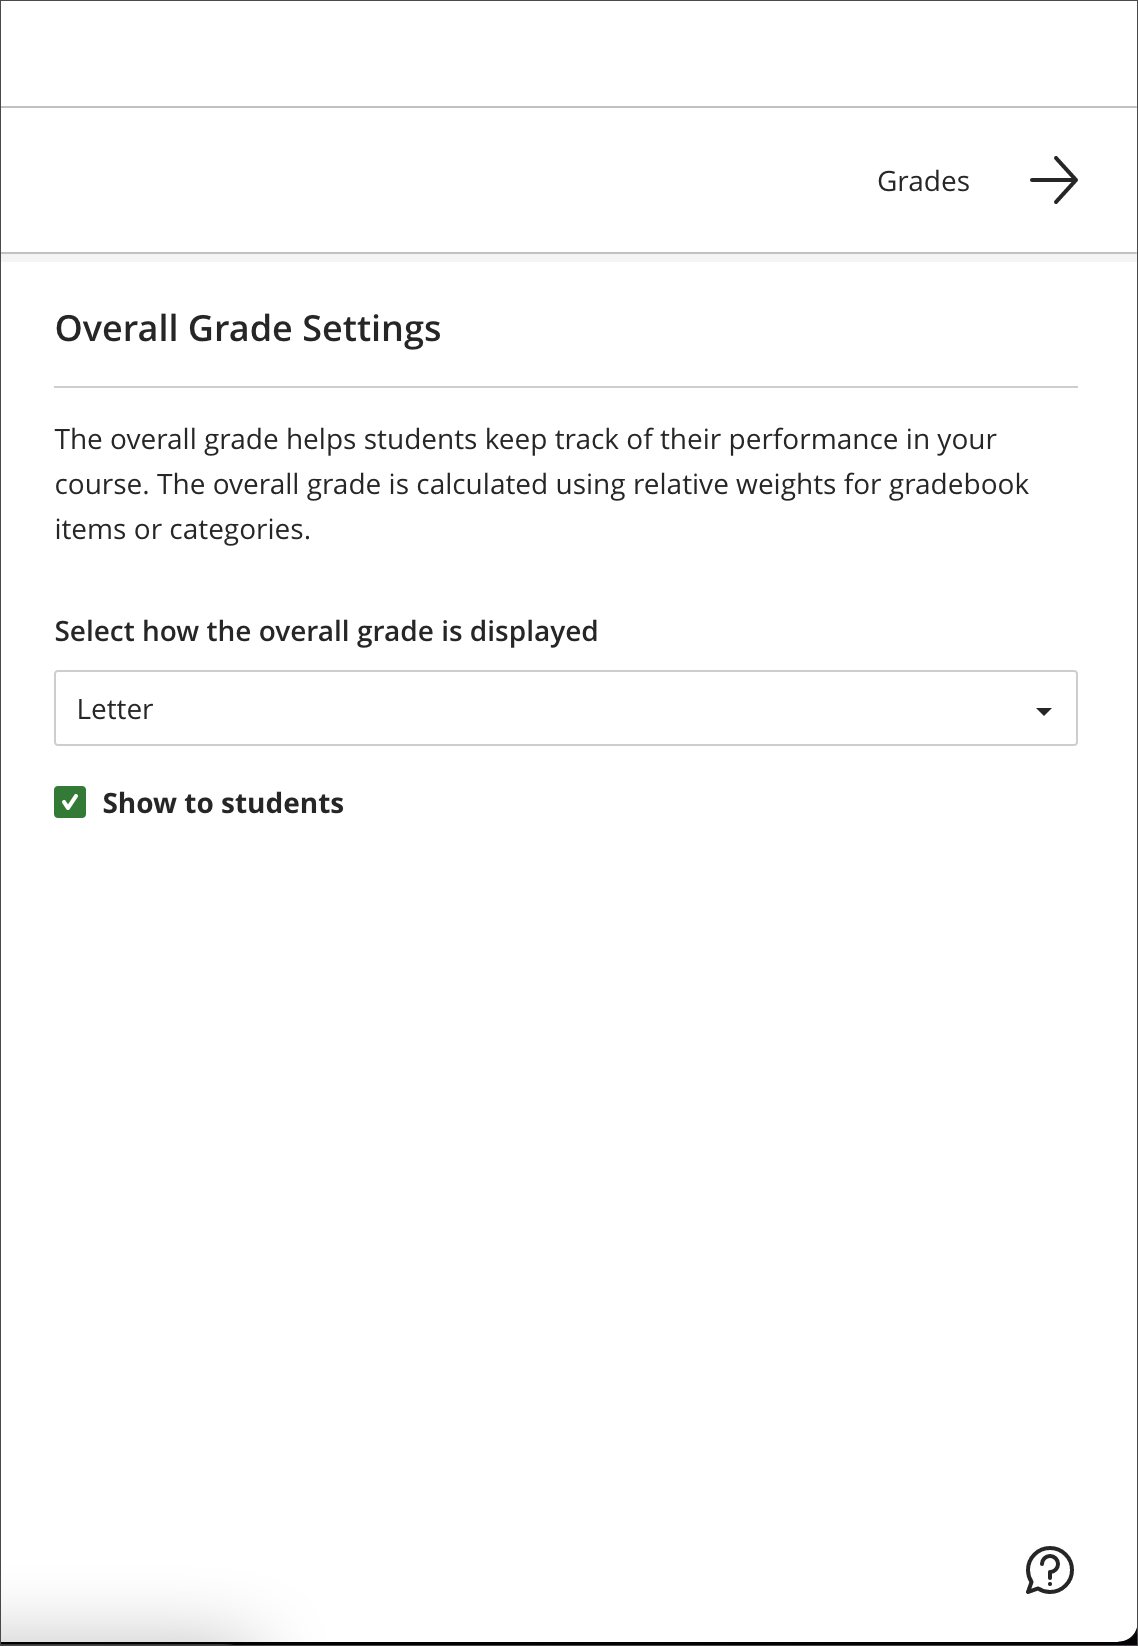 Instructor view of Overall Grade Settings - Before